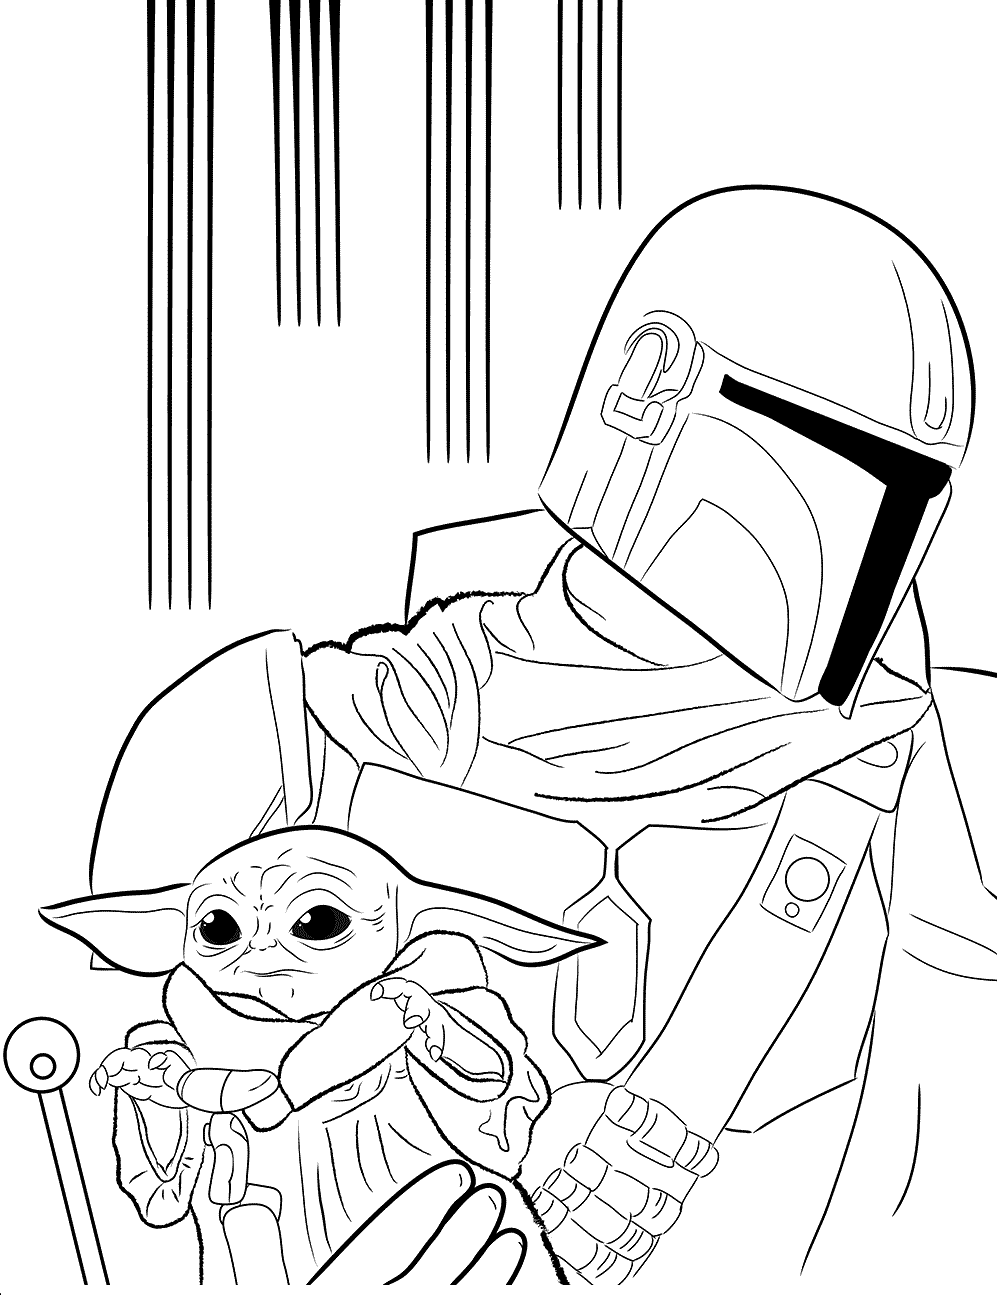 Mandalorian Coloring Pages Printable for Free Download